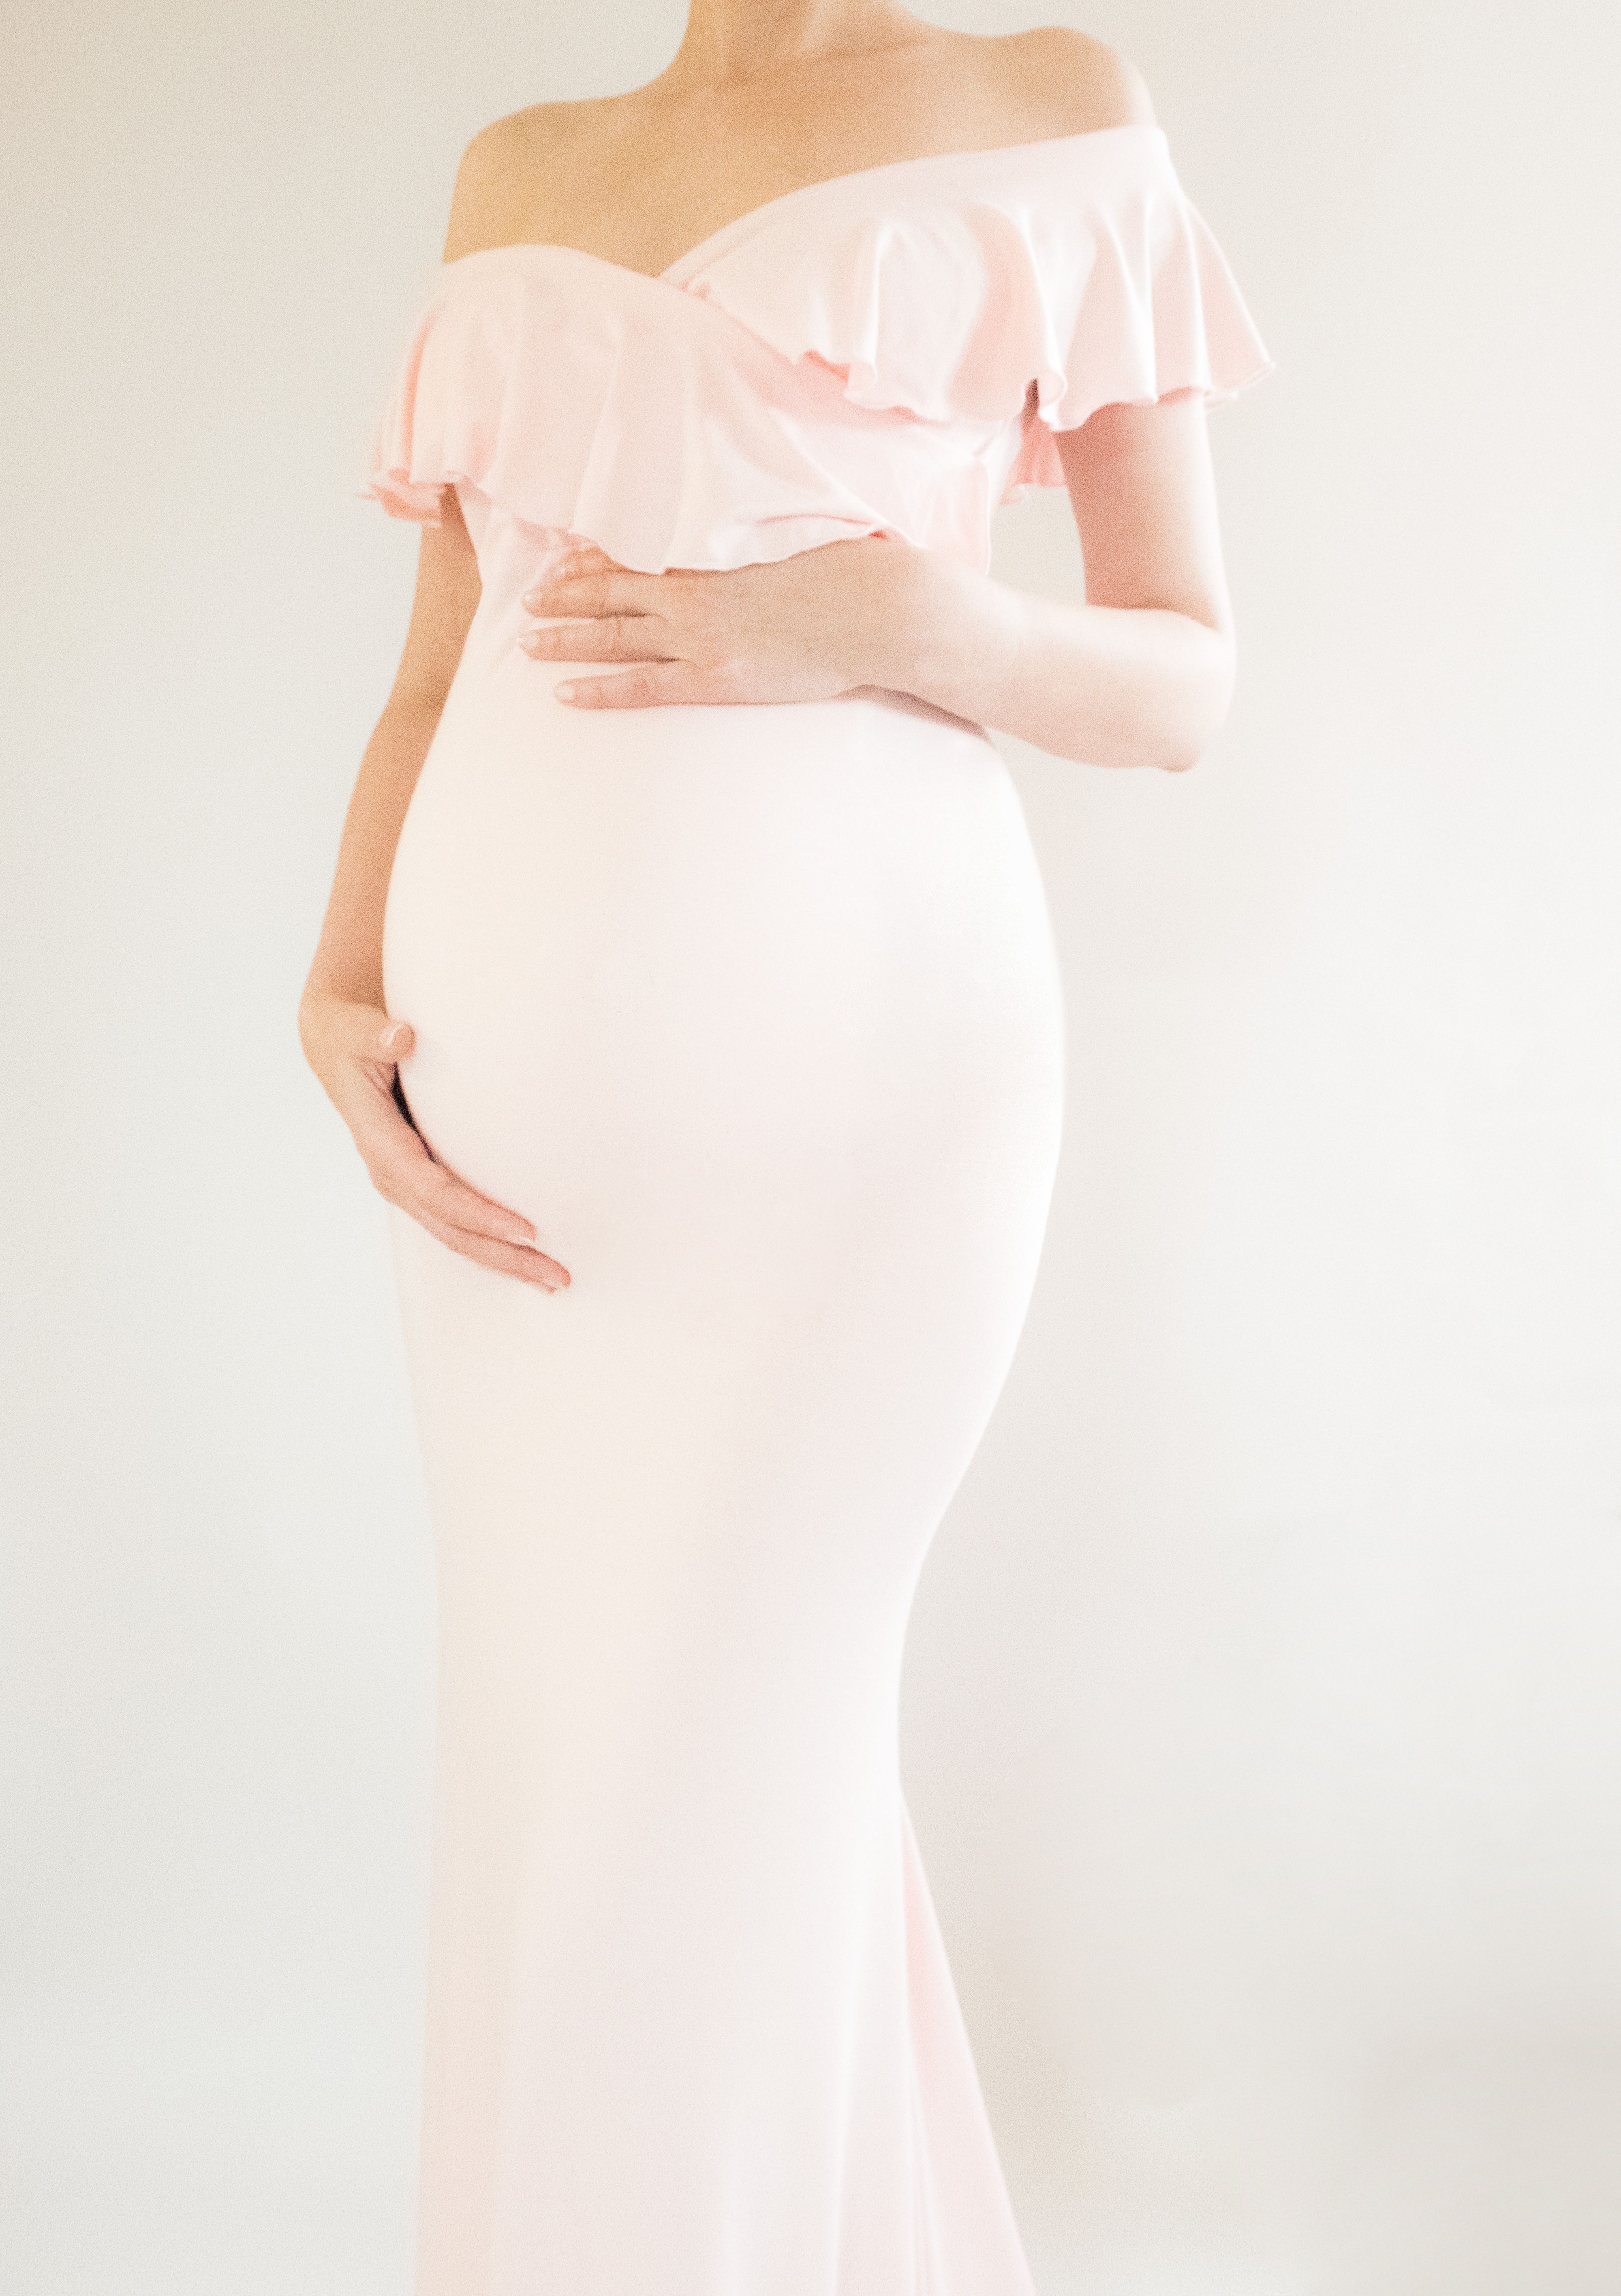 Full Size of Baby Shower:maternity Boutique Cute Maternity Dresses For Baby Shower Affordable Maternity Dresses For Baby Shower What To Wear To My Baby Shower Pink Maternity Dress Baby Shower Attire For Mom Maternity Gown Style Maternity Gowns For Photography